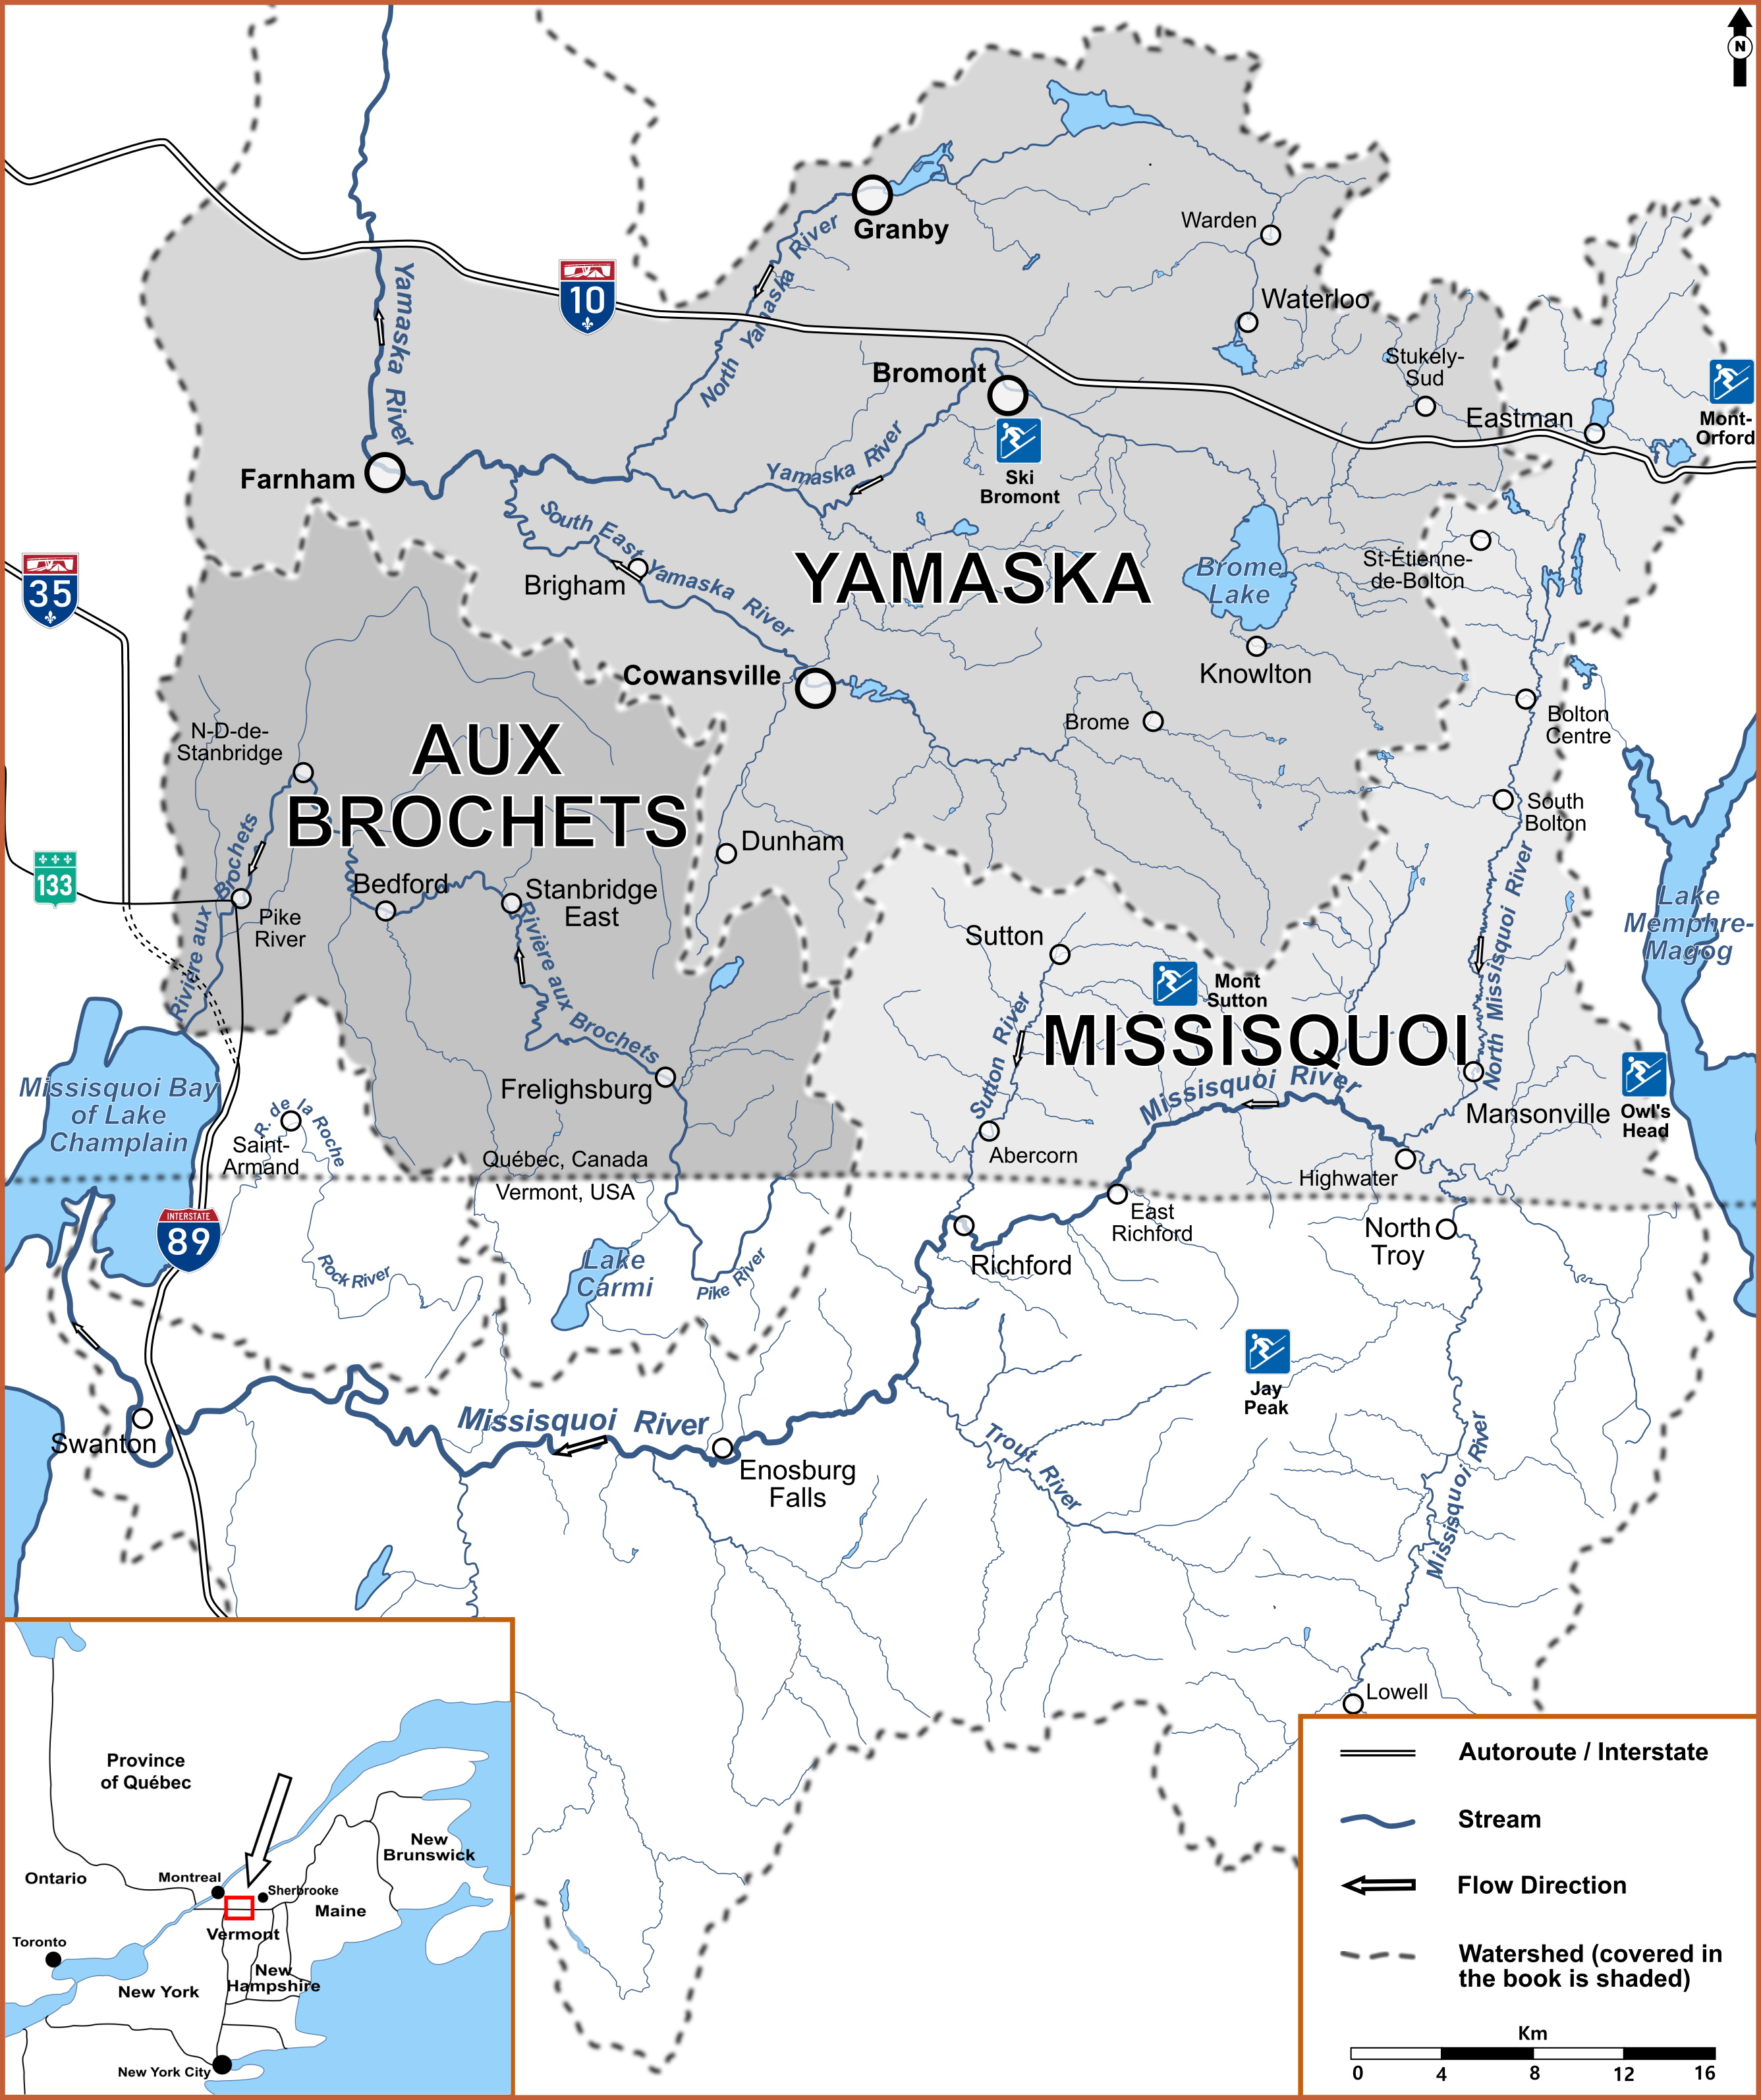 Part of the Eastern Townships showing the three watersheds covered in the book and the part of the Missisquoi River watershed situated in Vermont